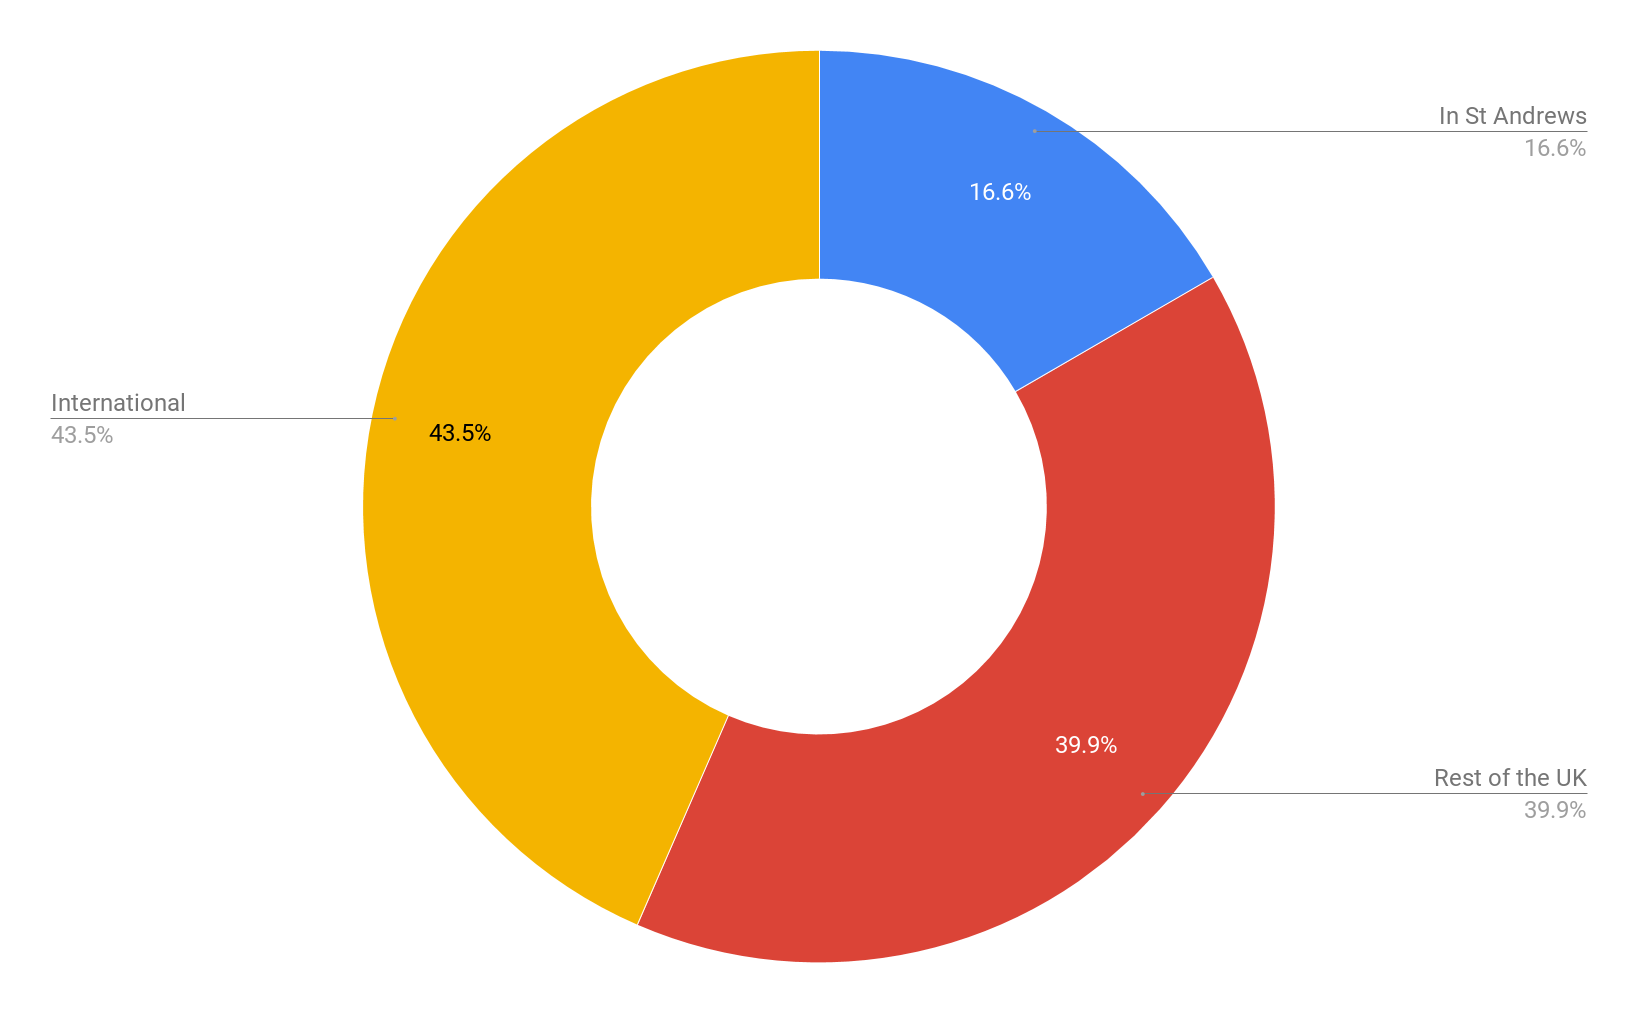 Pie chart showing percentage of unique page views per from St Andrews, the UK, and the rest of the world